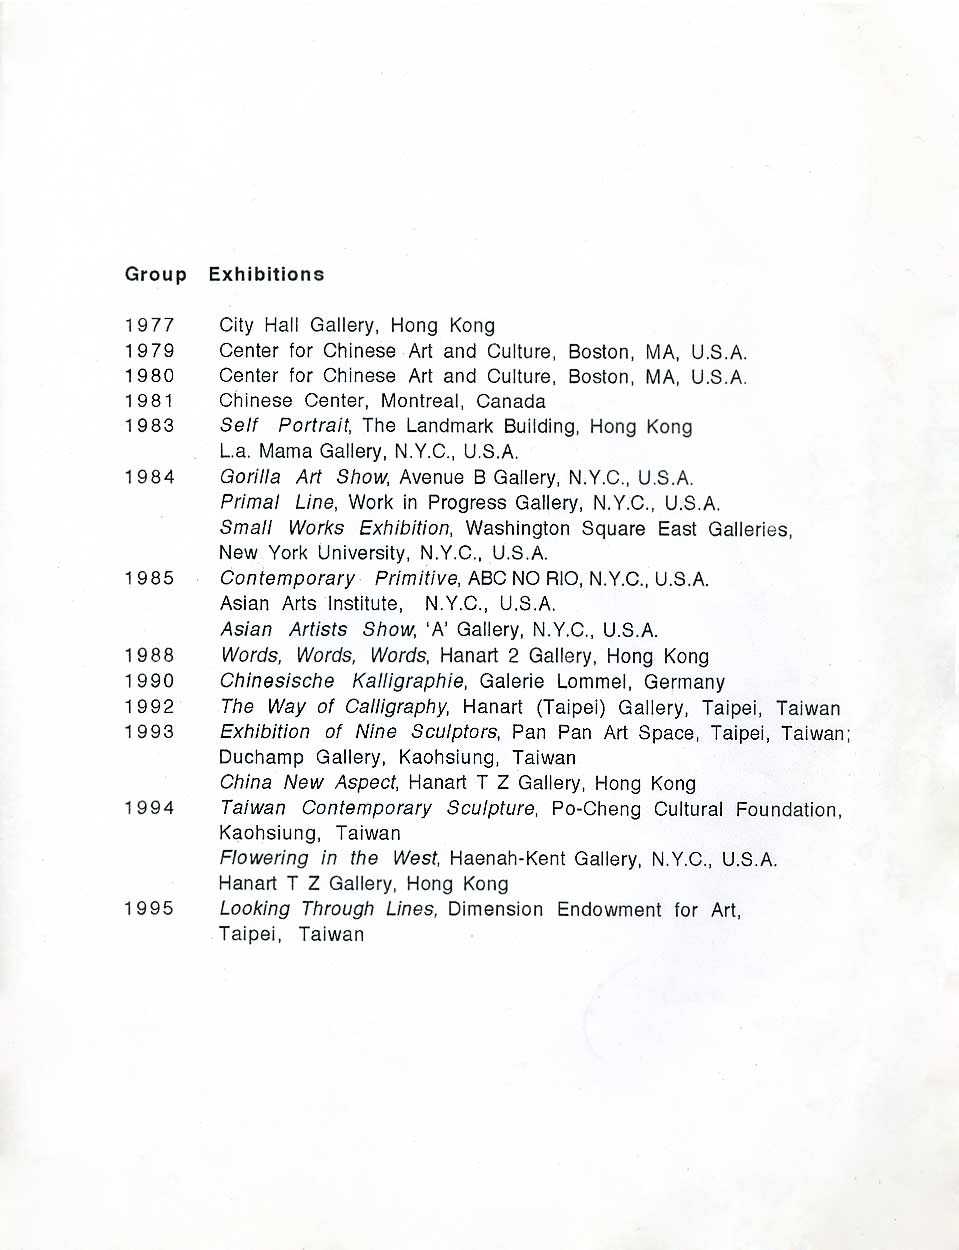 Ming Chip Fung's resume, pg 2